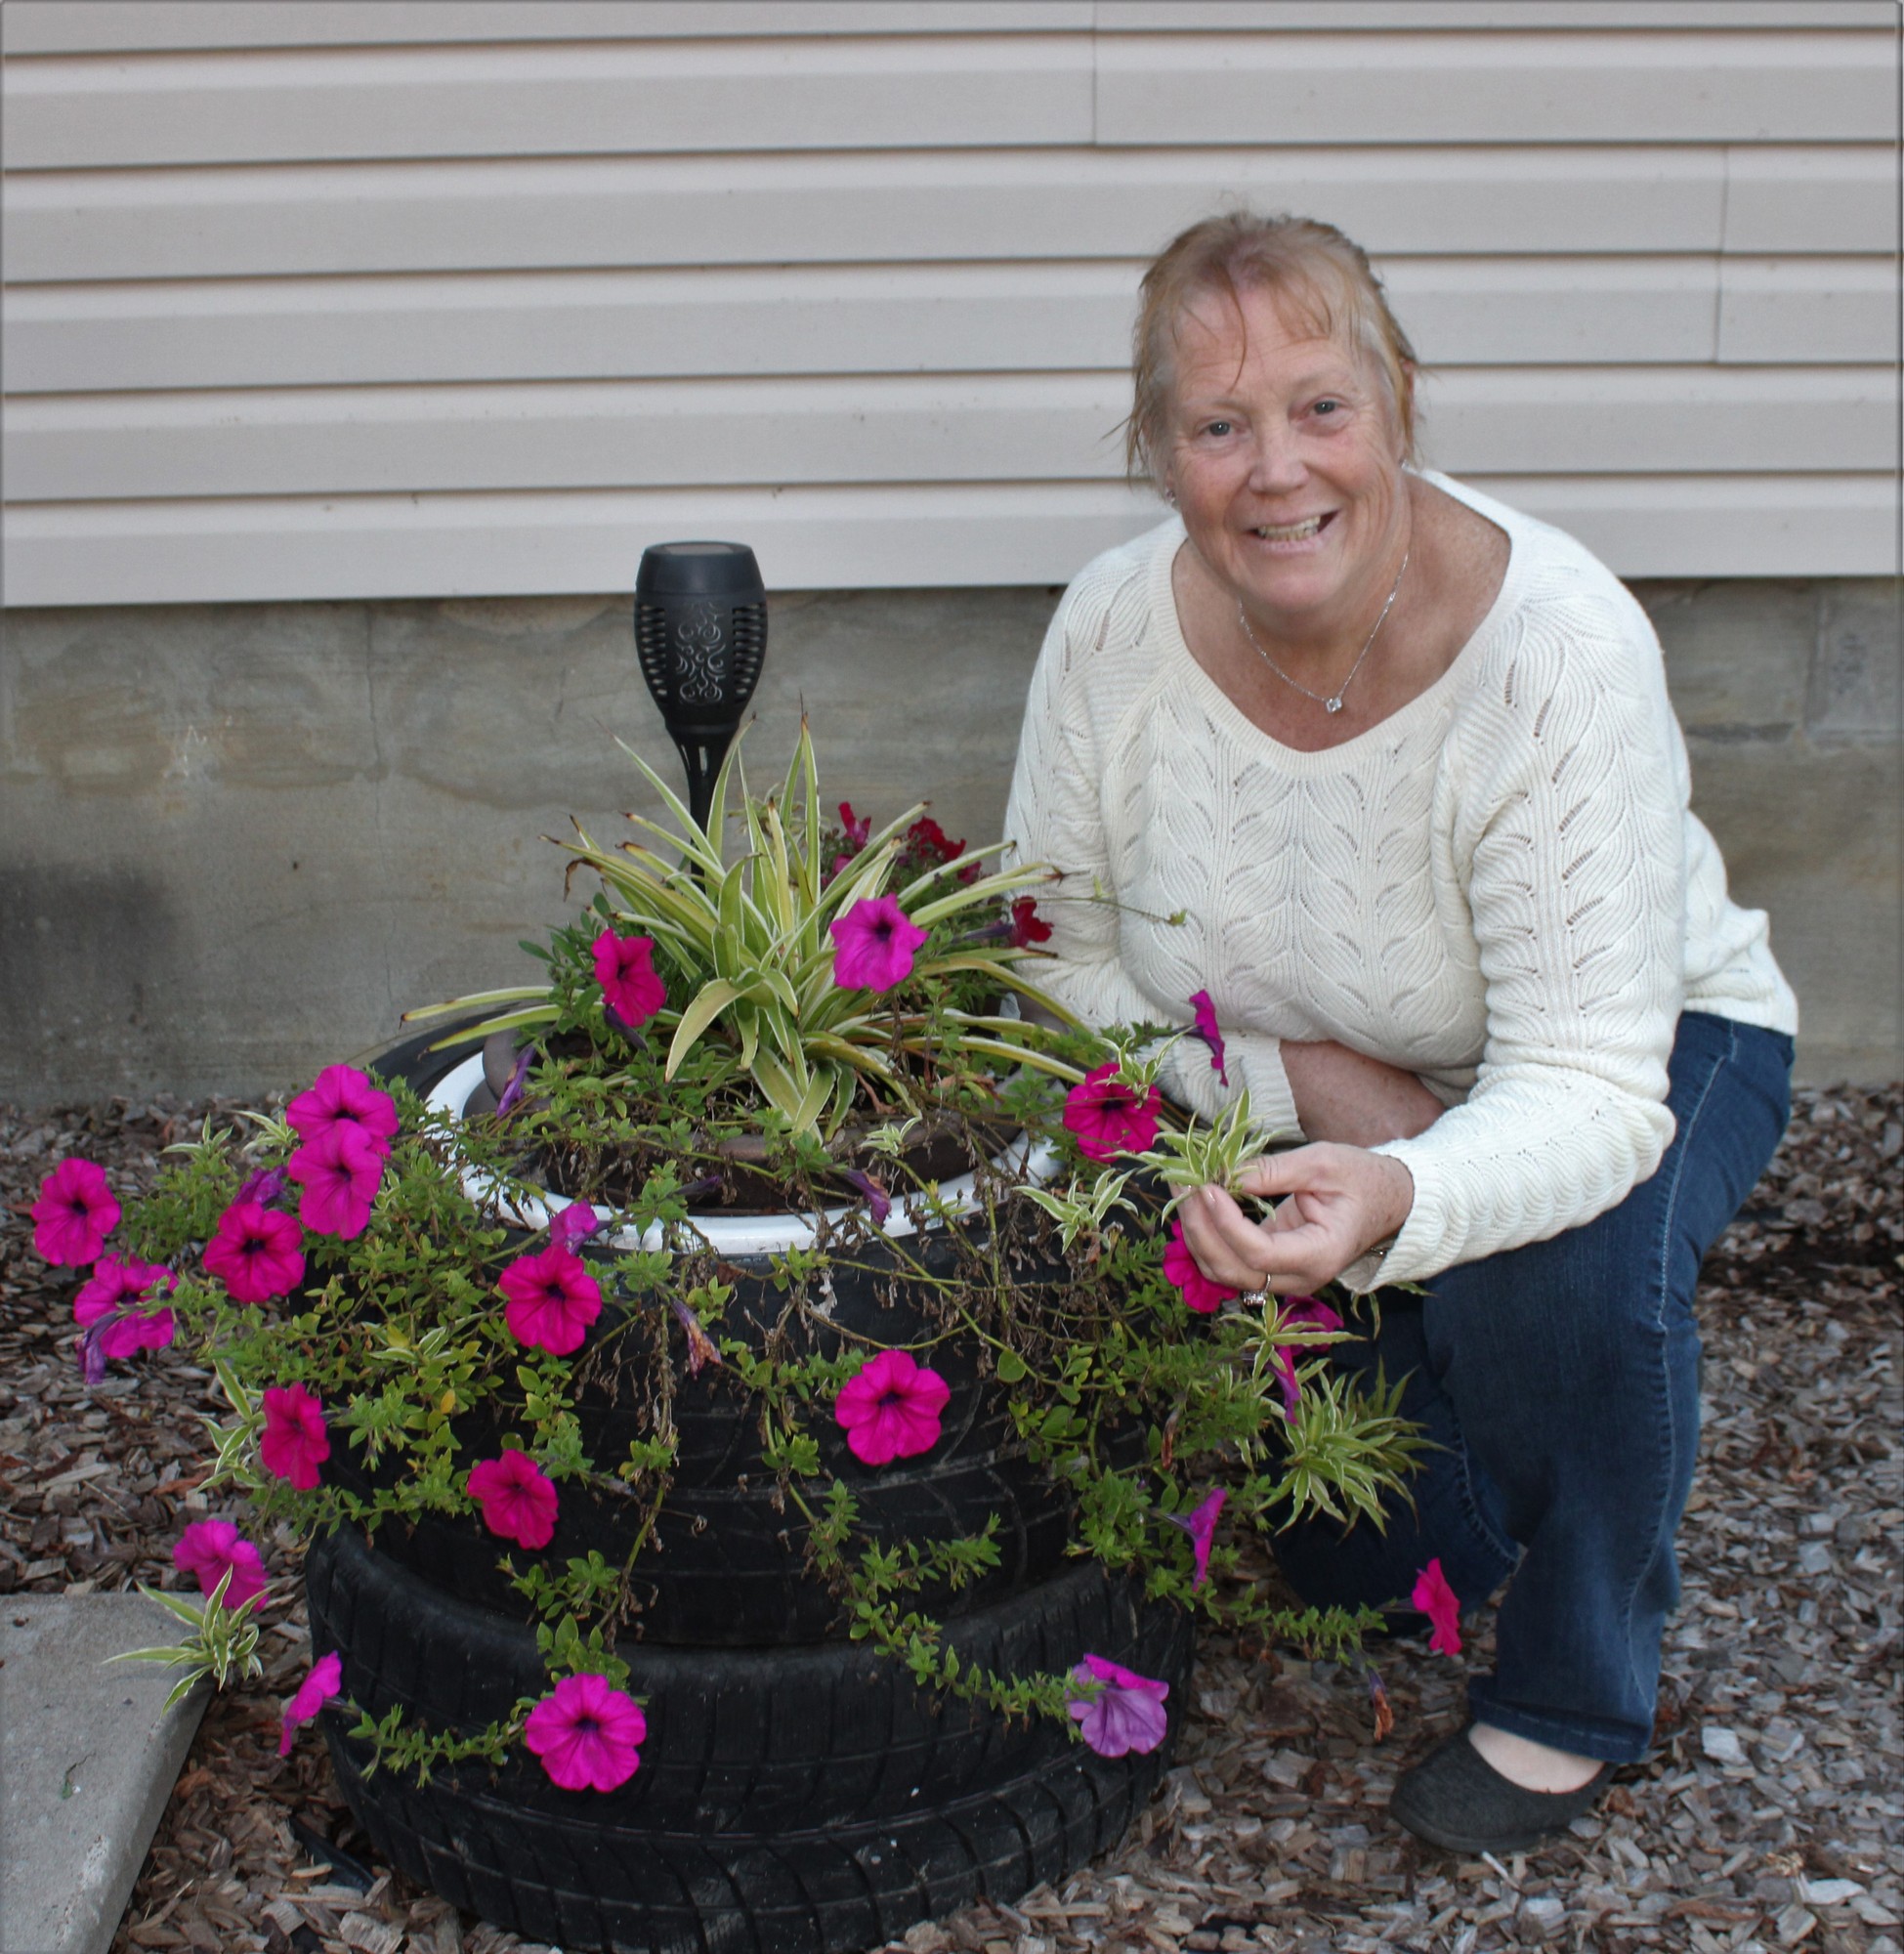 Carol Johnson, a first-semester horticulture student, enjoys spending time in her flower garden from early spring through to the last flowers of fall. She is shown with one of her recycling projects which sees a planter, made from old tires, with potted petunias and a spider plant in her front garden.